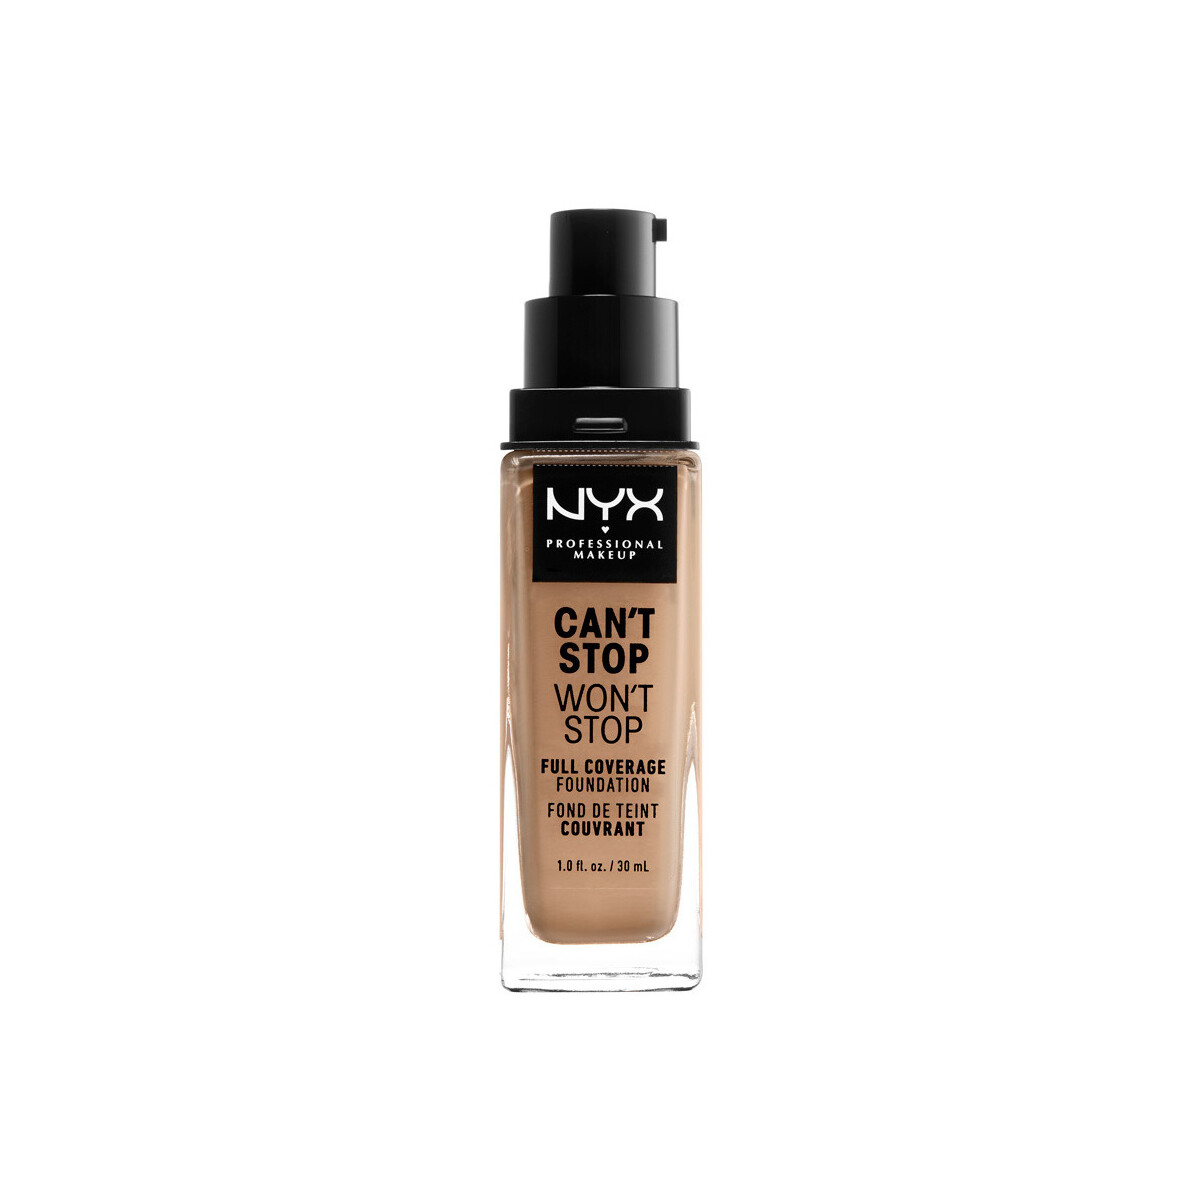 Beauty Make-up & Foundation  Nyx Professional Make Up Can't Stop Won't Stop Full Coverage Foundation classic Tan 